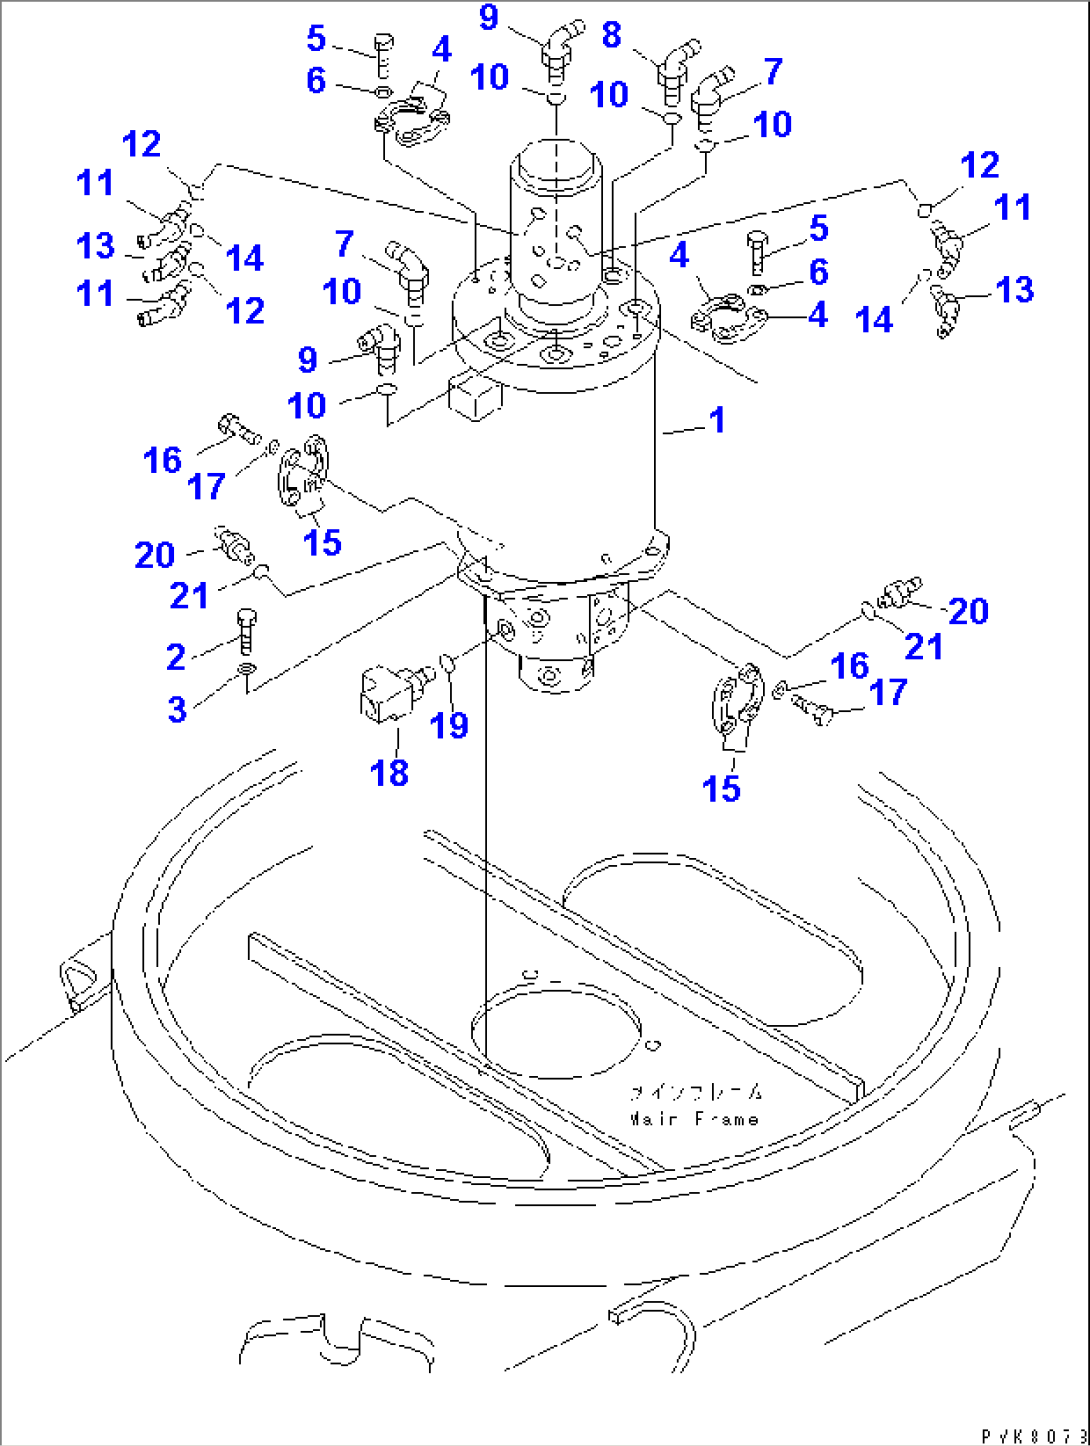 SWIVEL JOINT AND RELATED PARTS